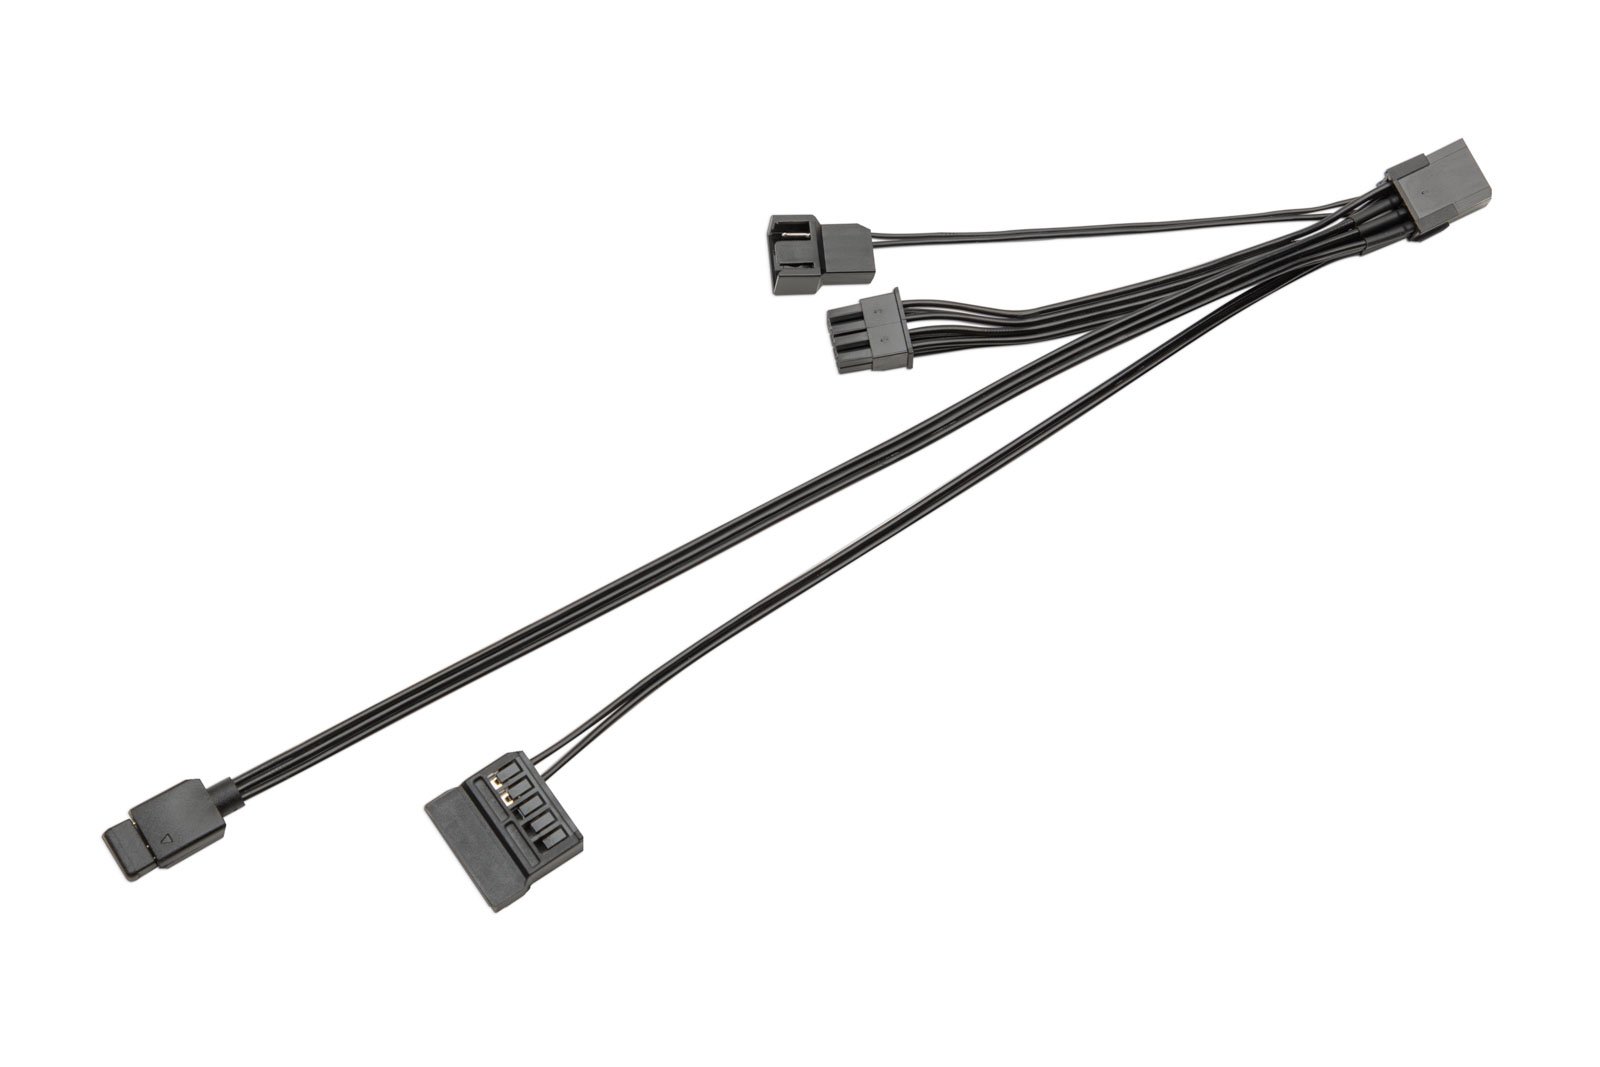 EK Introduces OmniLink Solutions: The Ultimate PC Cable Management Solution for Every Need